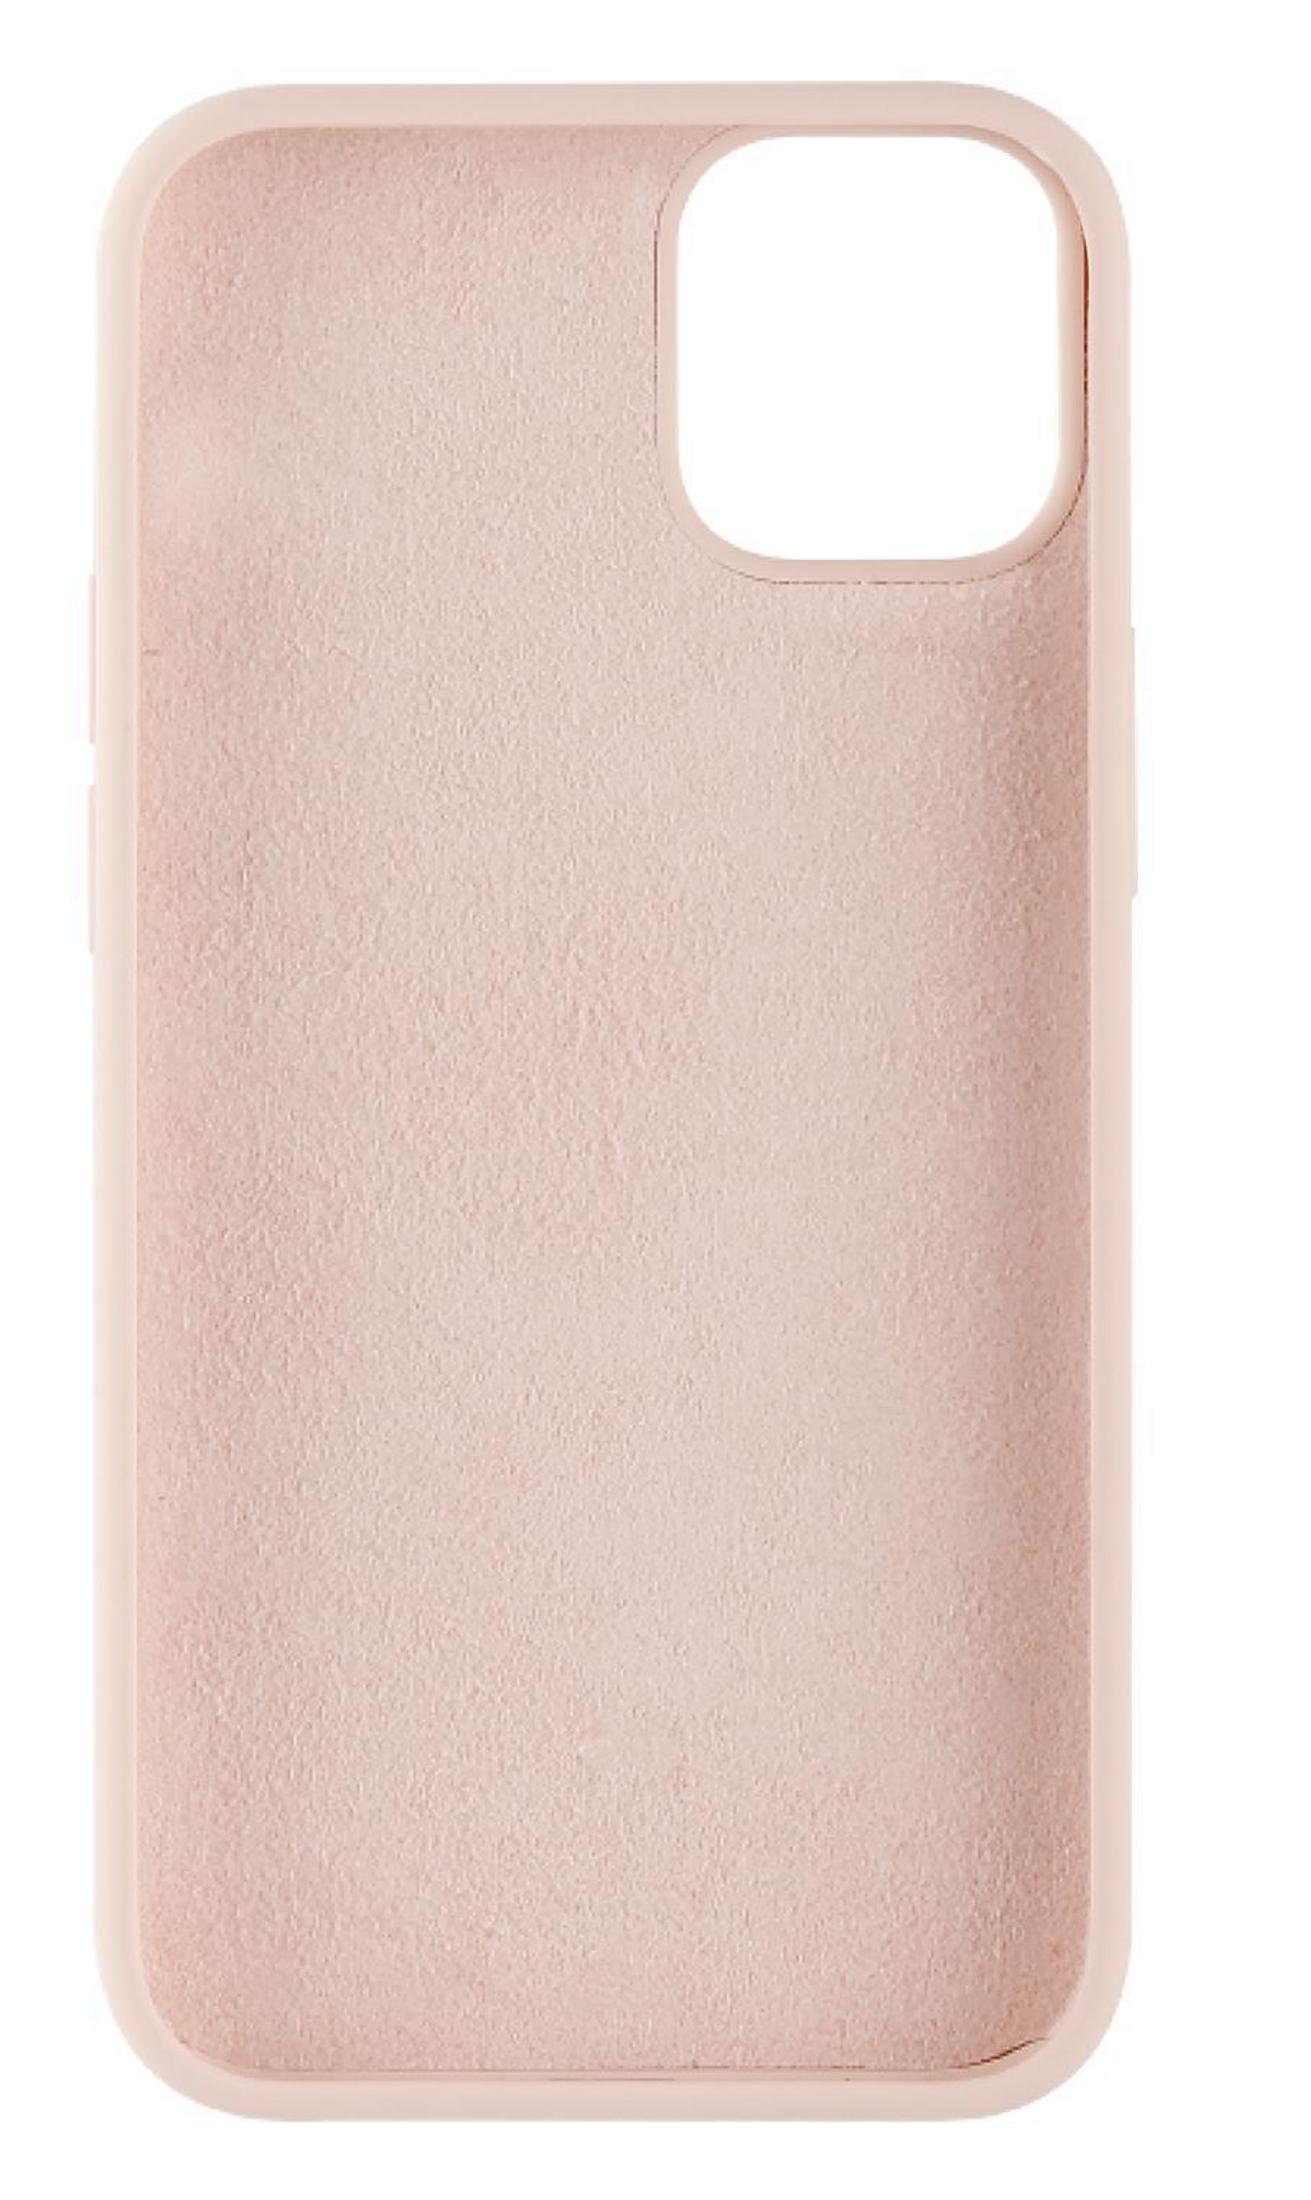 PS, Apple, VIVANCO IPH13 COVER 62856 iPhone HYPE 13, Backcover, Pink-Sand